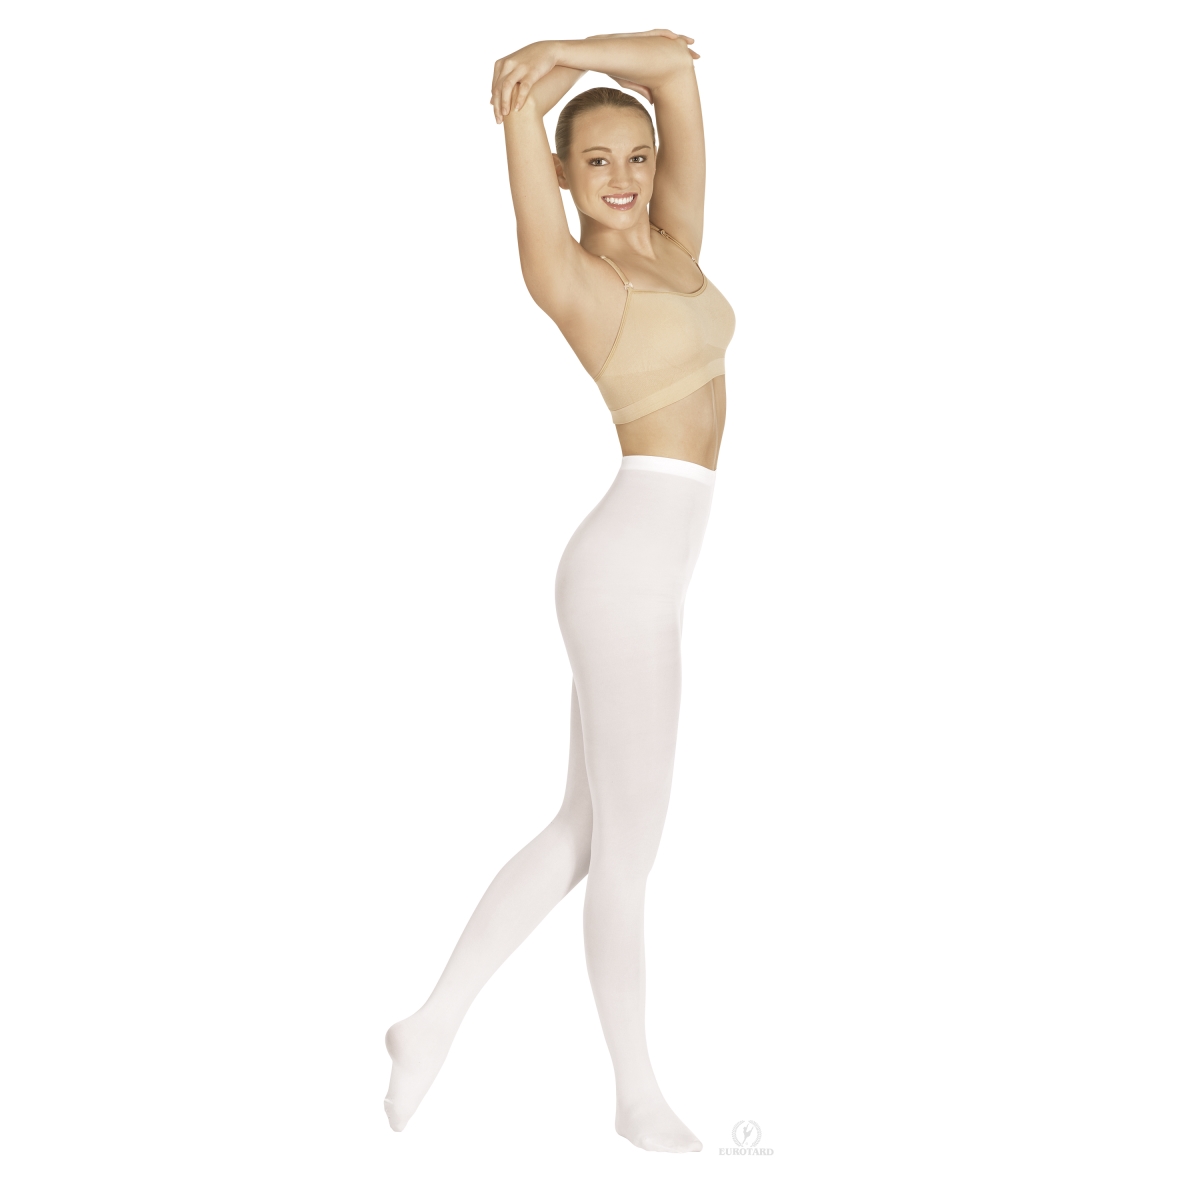 215-w-xxl Intimates Adult Non-run Footed Tights, White - 2xl